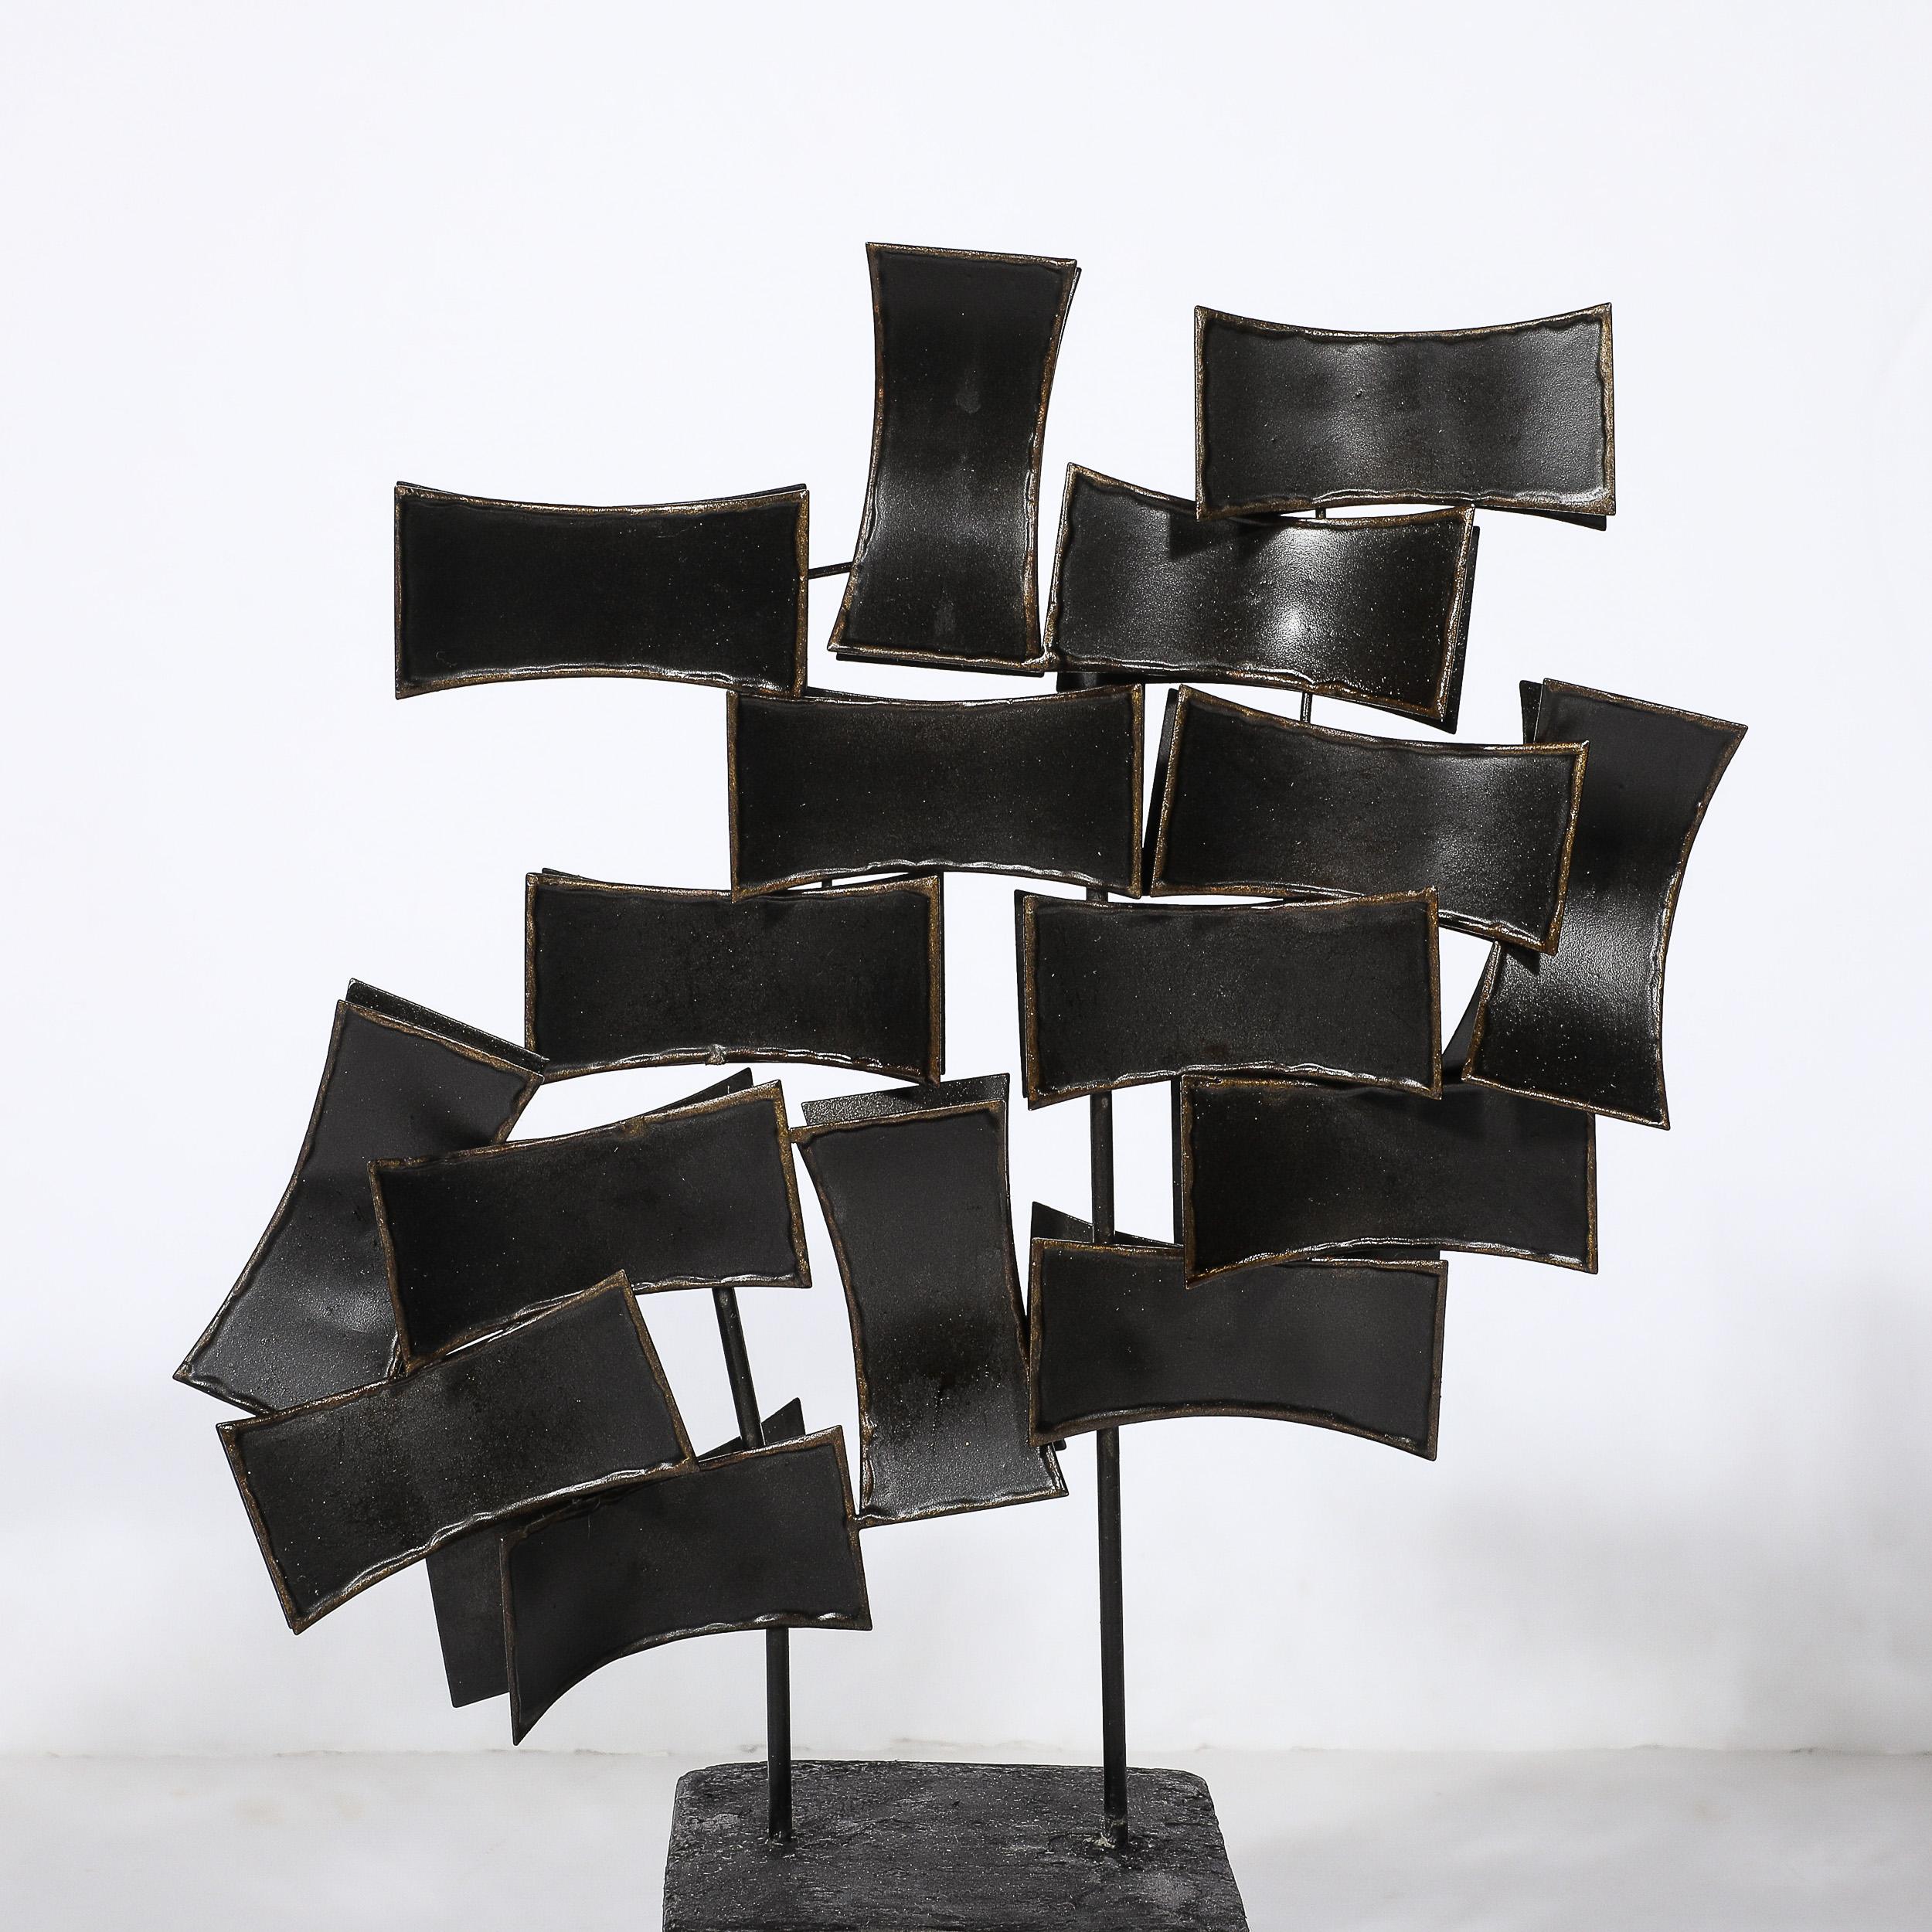 American Mid-Century Abstract Brutalist Sculpture in Cut Bronze, Manner of Curtis Jeré For Sale